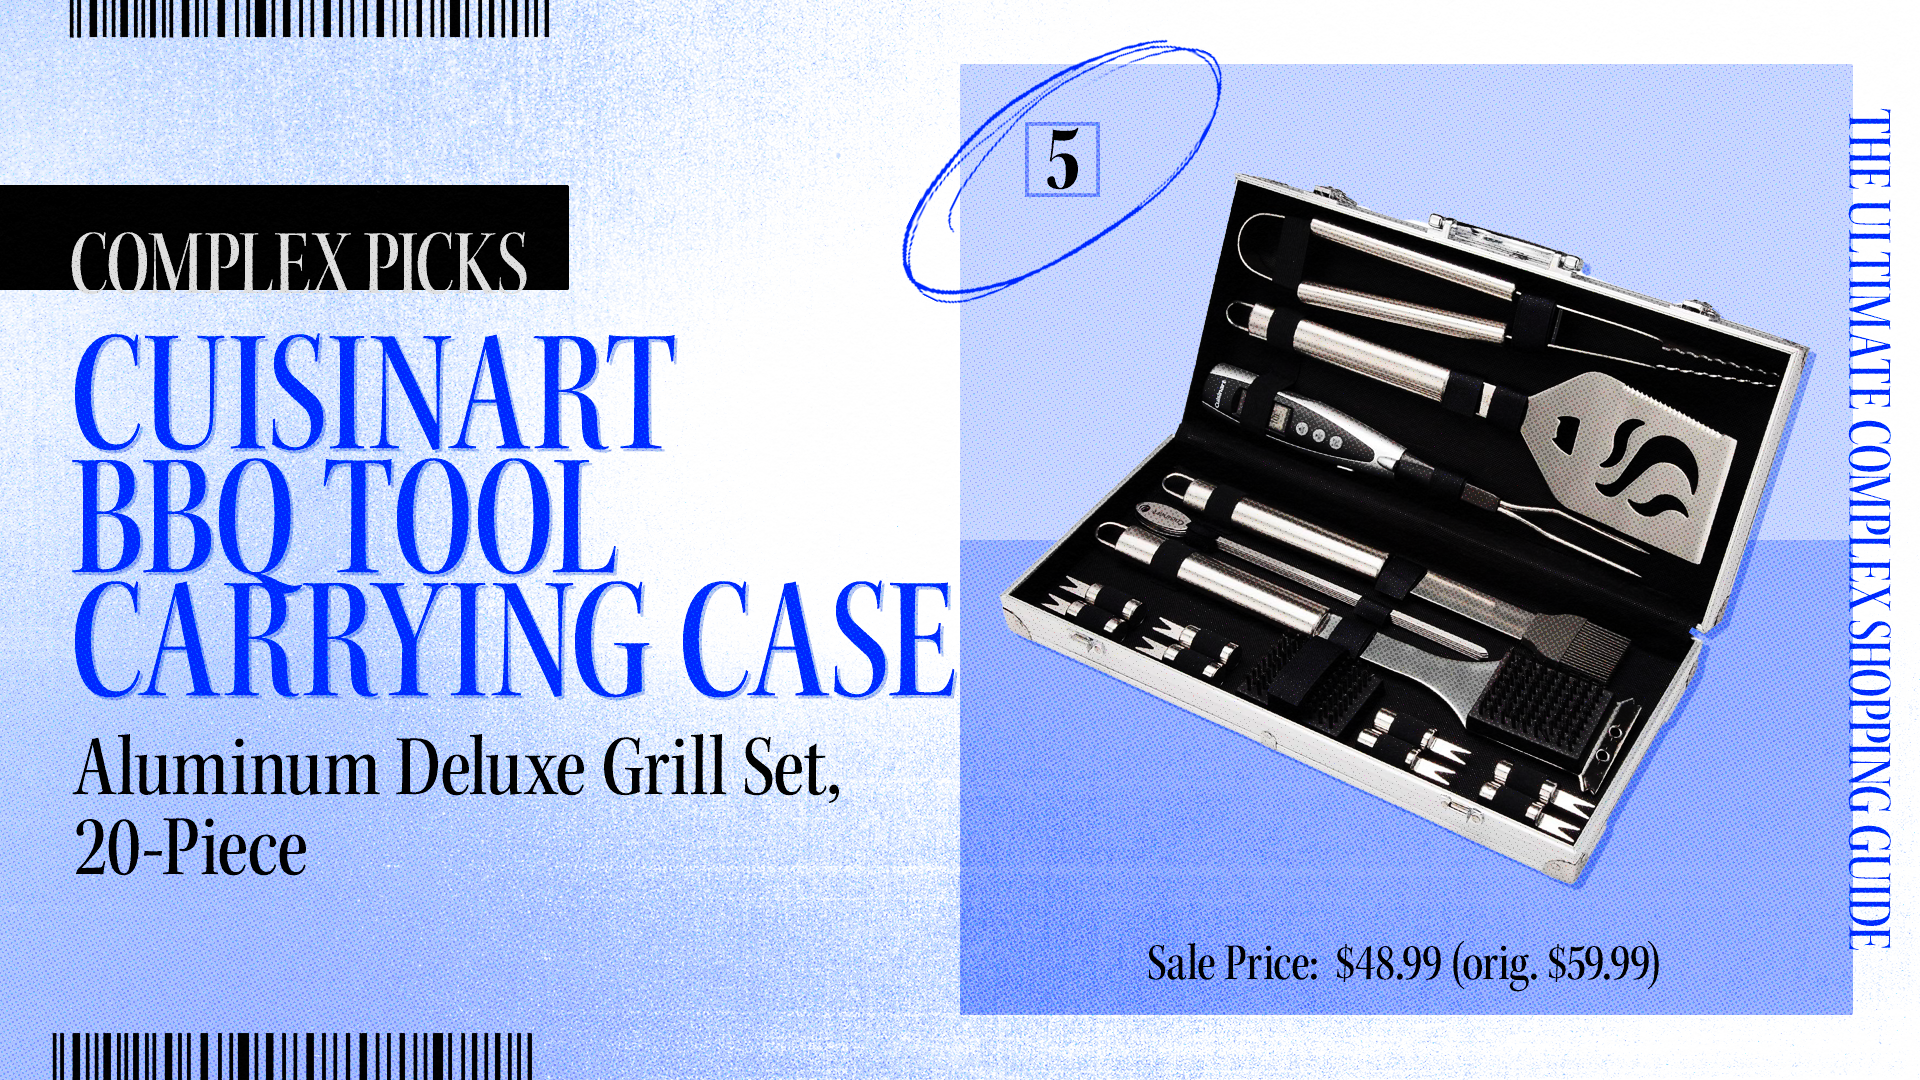 Advertisement for Cuisinart BBQ Tool Carrying Case: Aluminum Deluxe Grill Set, 20-piece, with a sale price of $48.99 (originally $59.99)